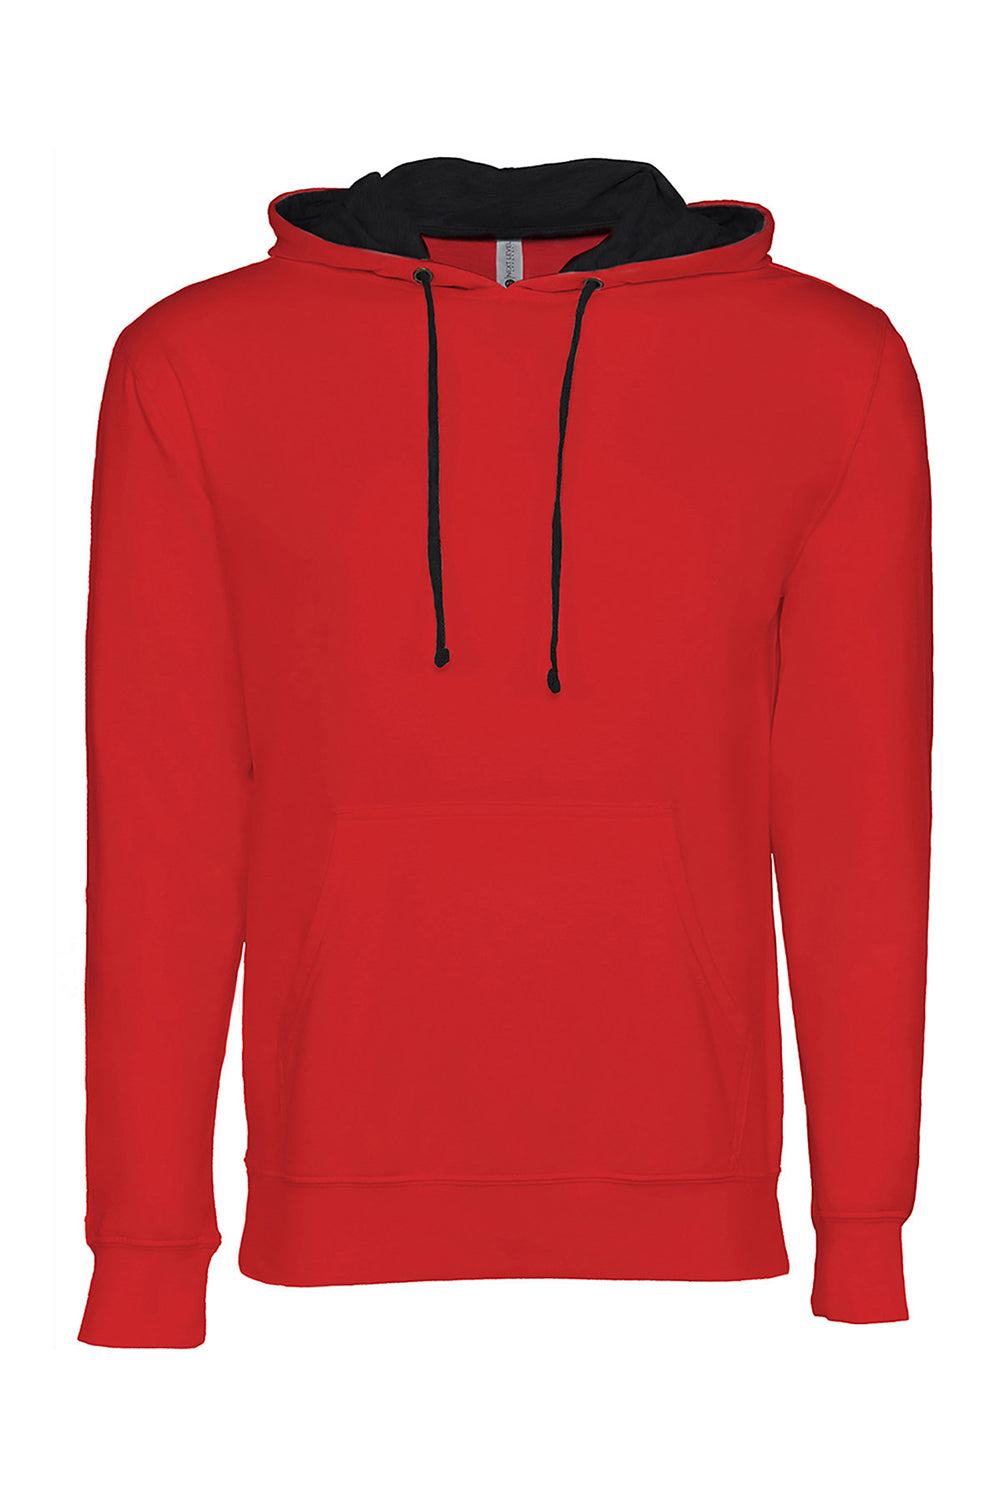 Next Level 9301 Mens French Terry Fleece Hooded Sweatshirt Hoodie Red/Black Flat Front